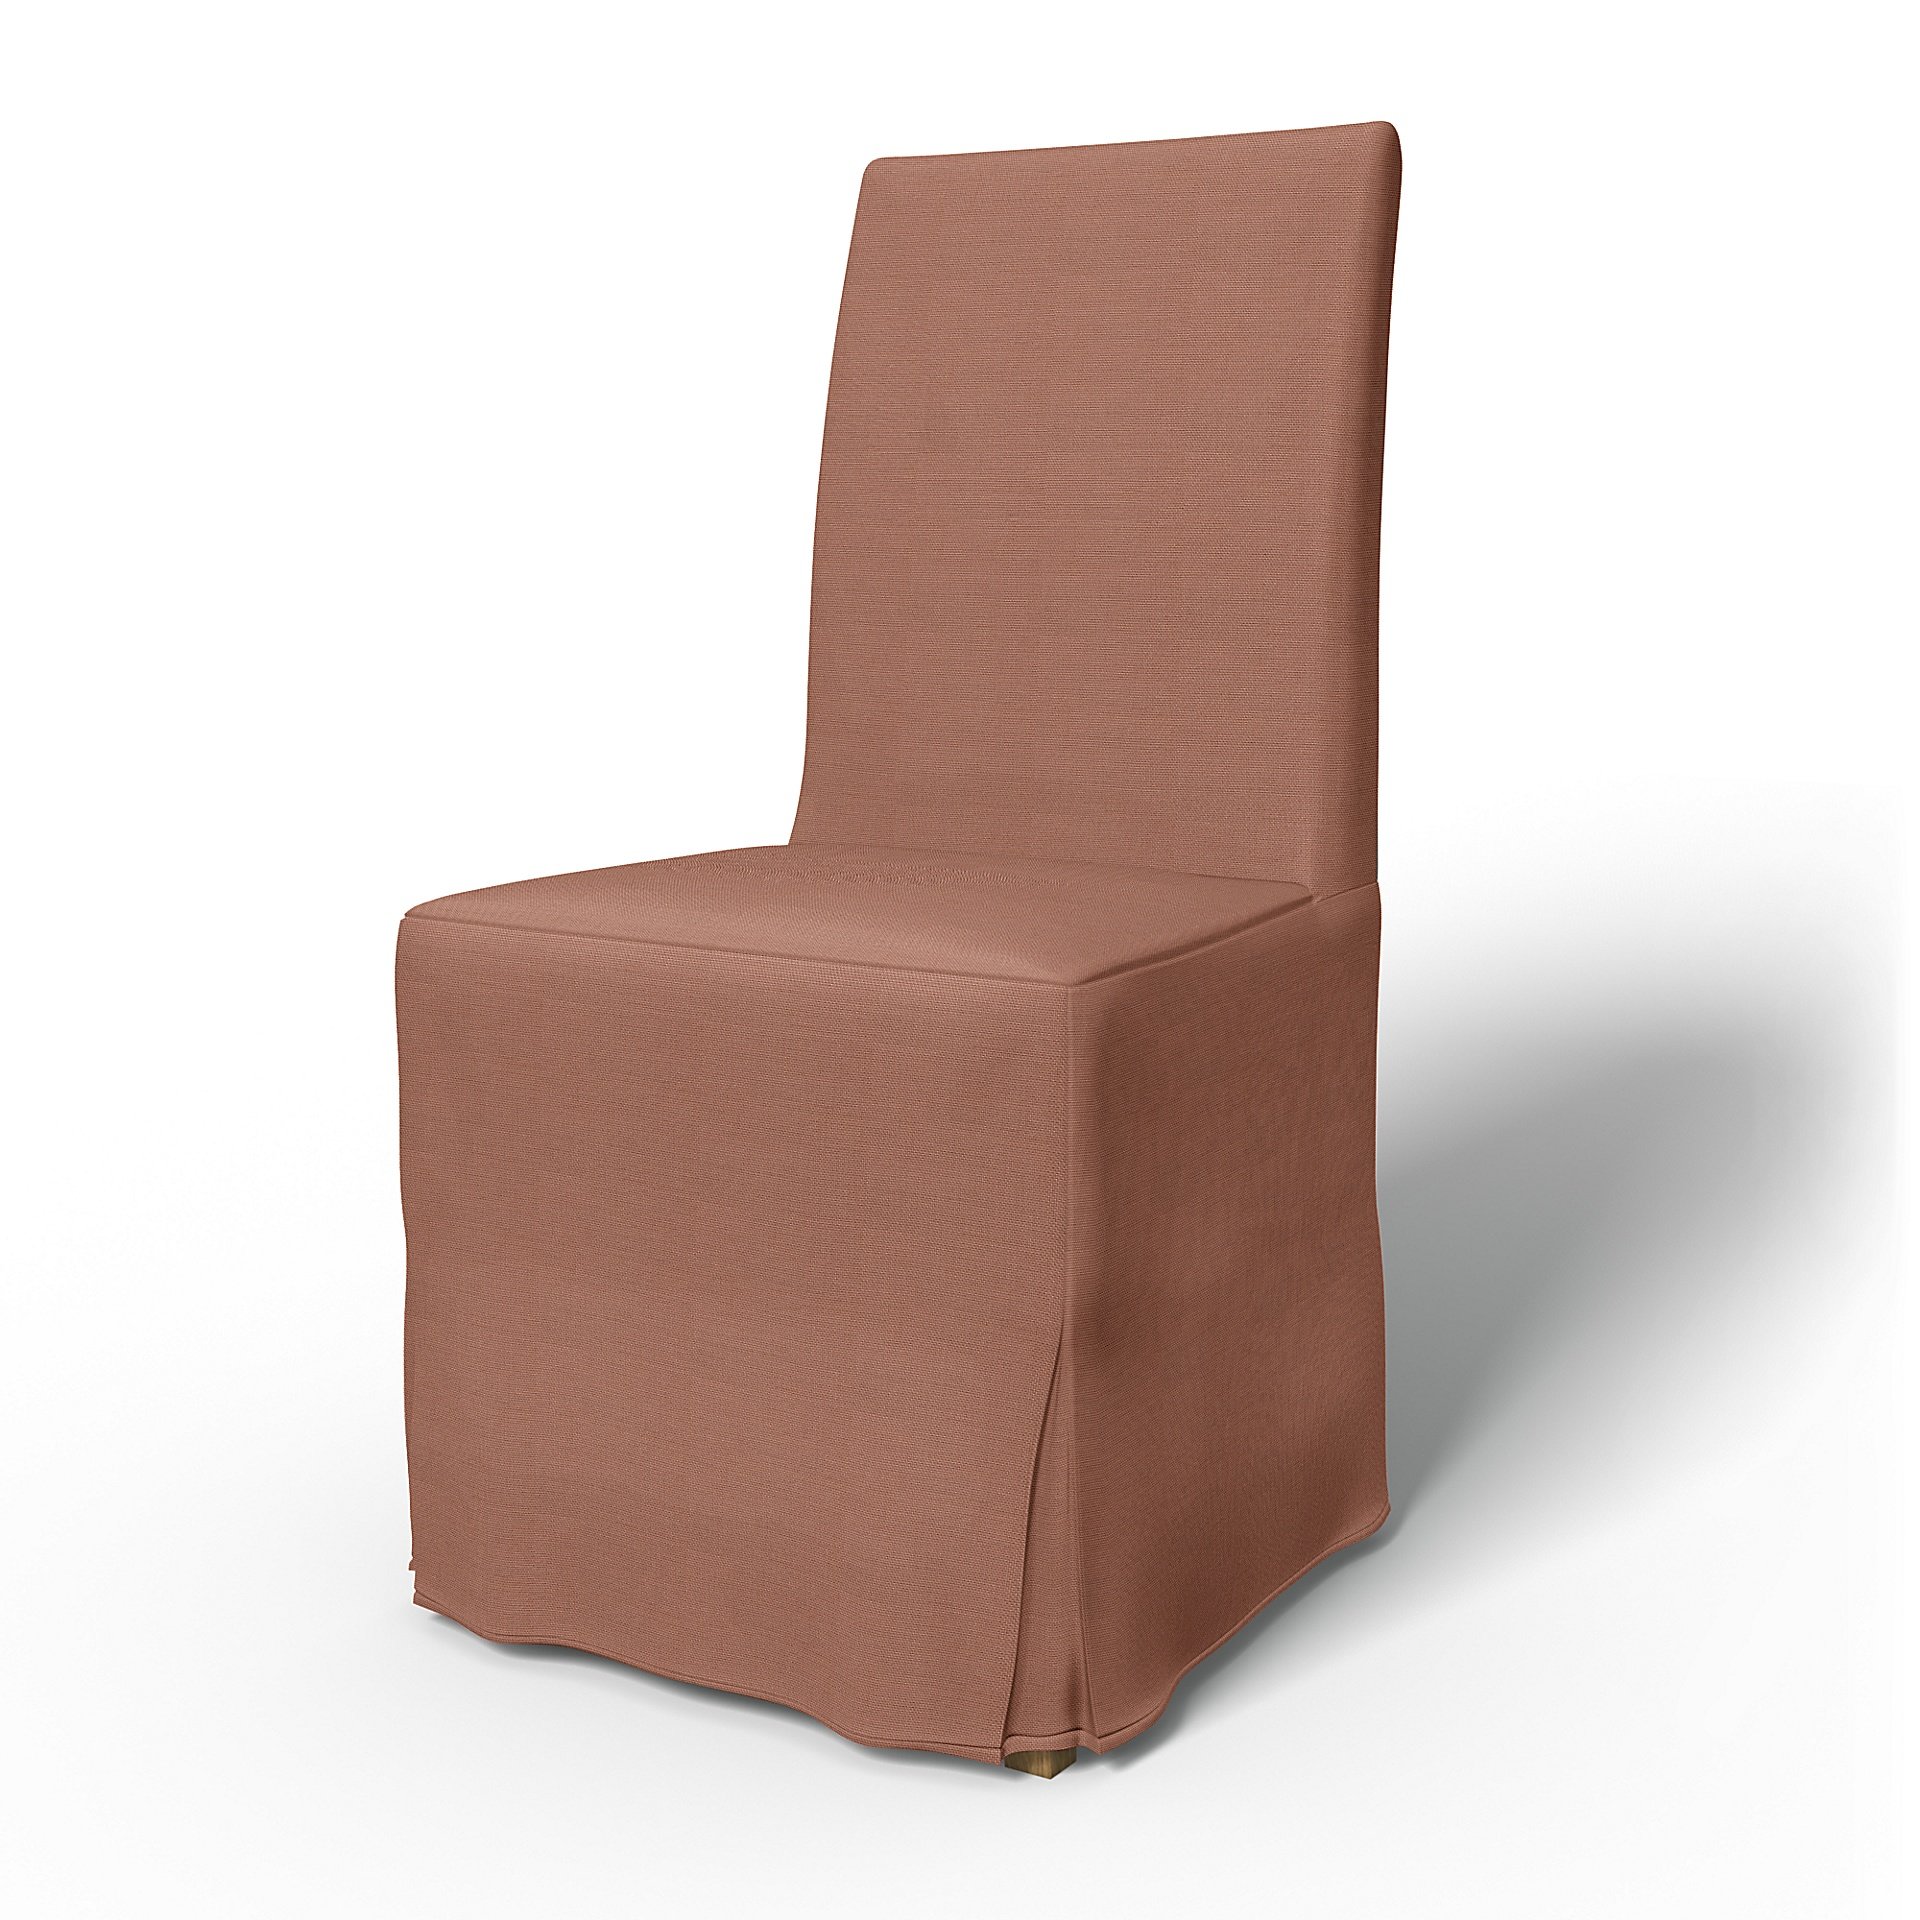 IKEA - Henriksdal Dining Chair Cover Long Skirt with Box Pleat (Standard model), Dusty Pink, Outdoor